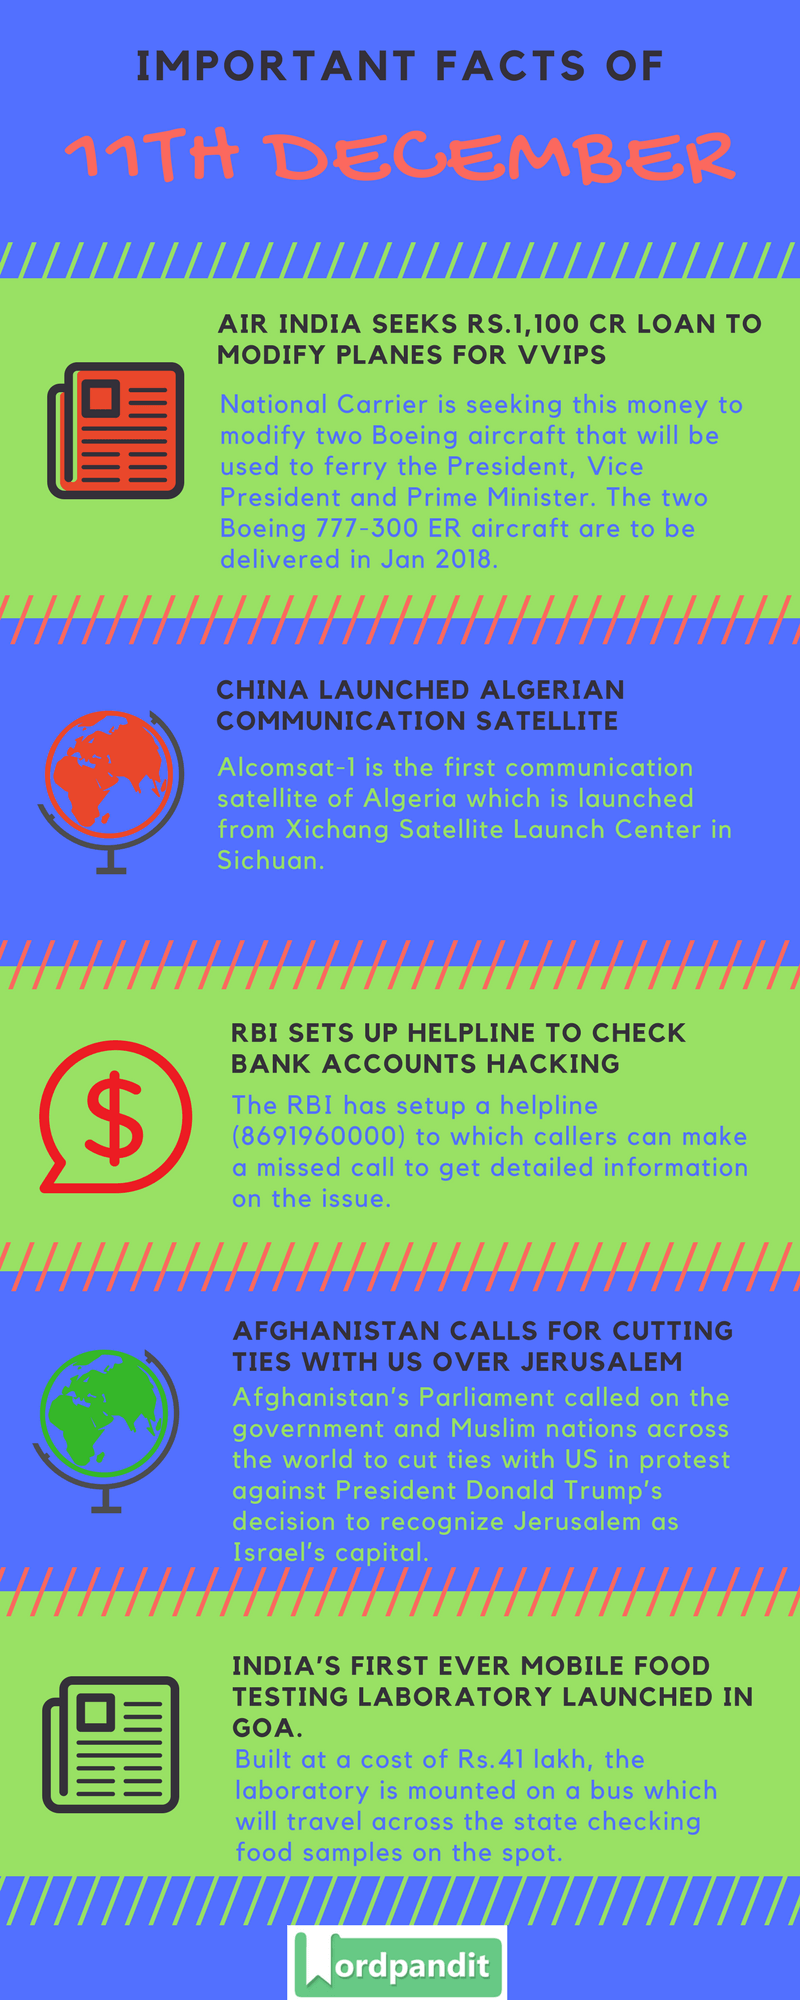 Daily-Current-Affairs-11-december-2017-Current-Affairs-Quiz-december-11-2017-Current-Affairs-Infographic